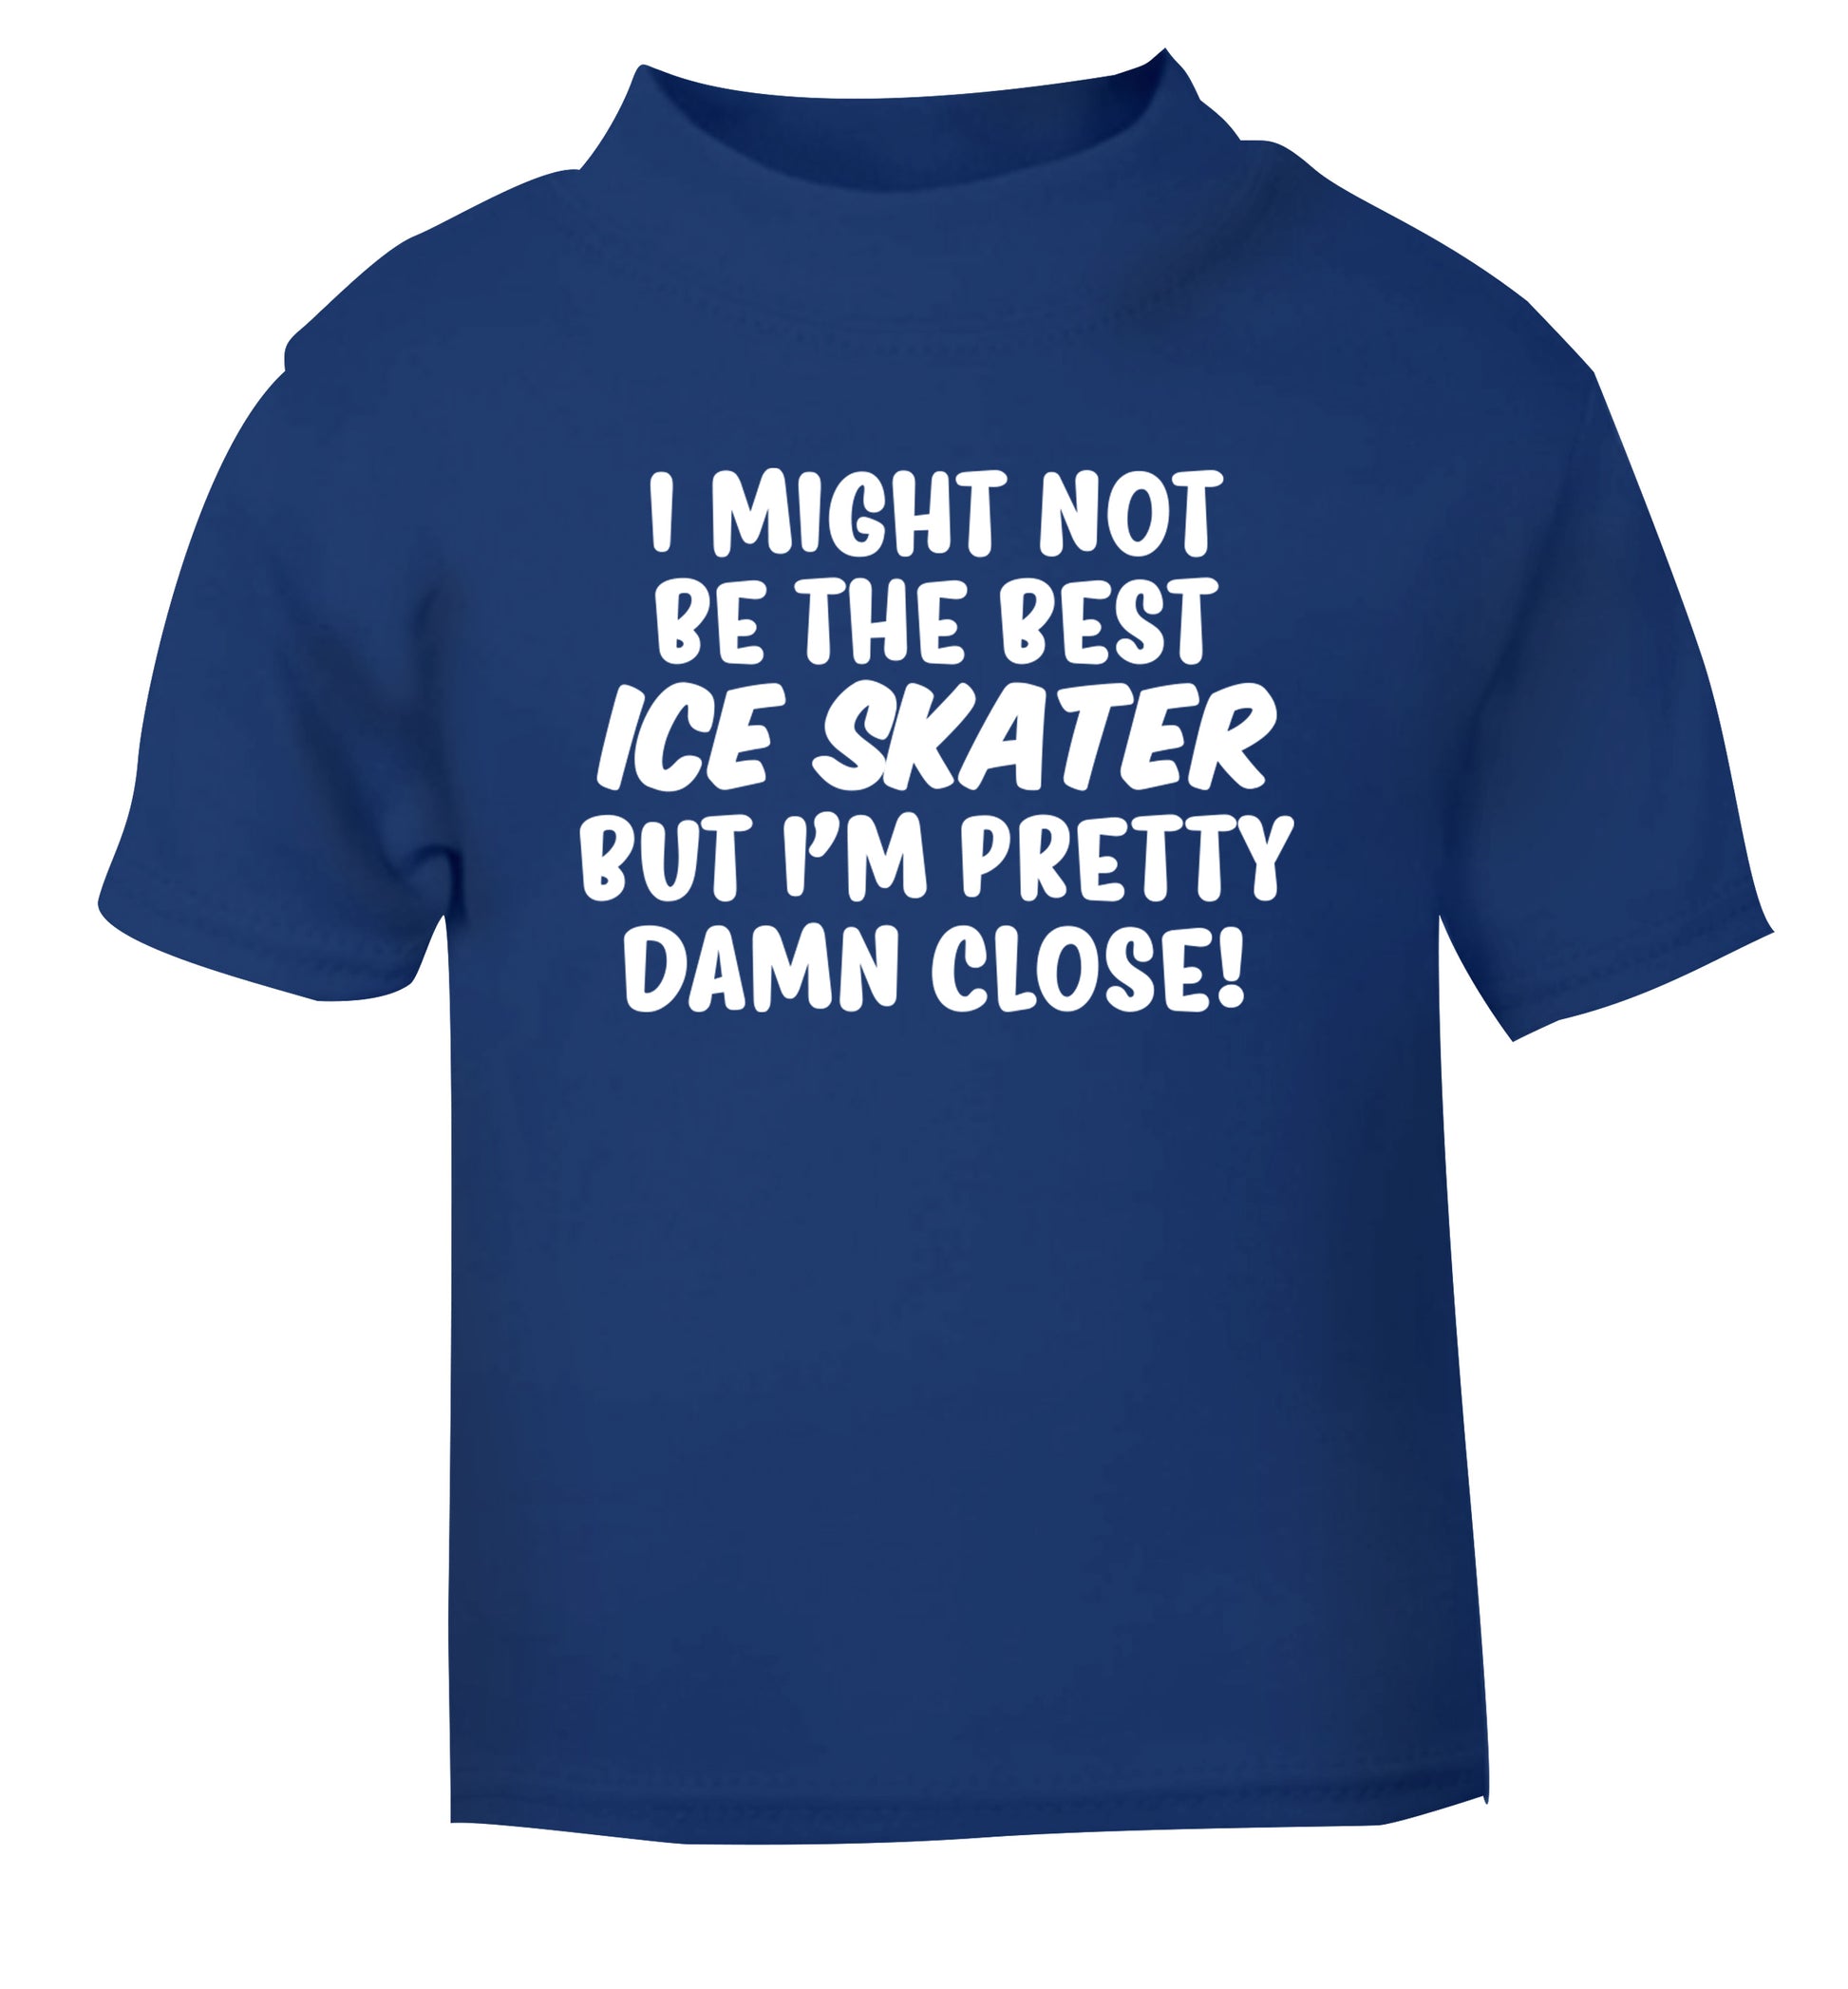 I might not be the best ice skater but I'm pretty damn close! blue Baby Toddler Tshirt 2 Years